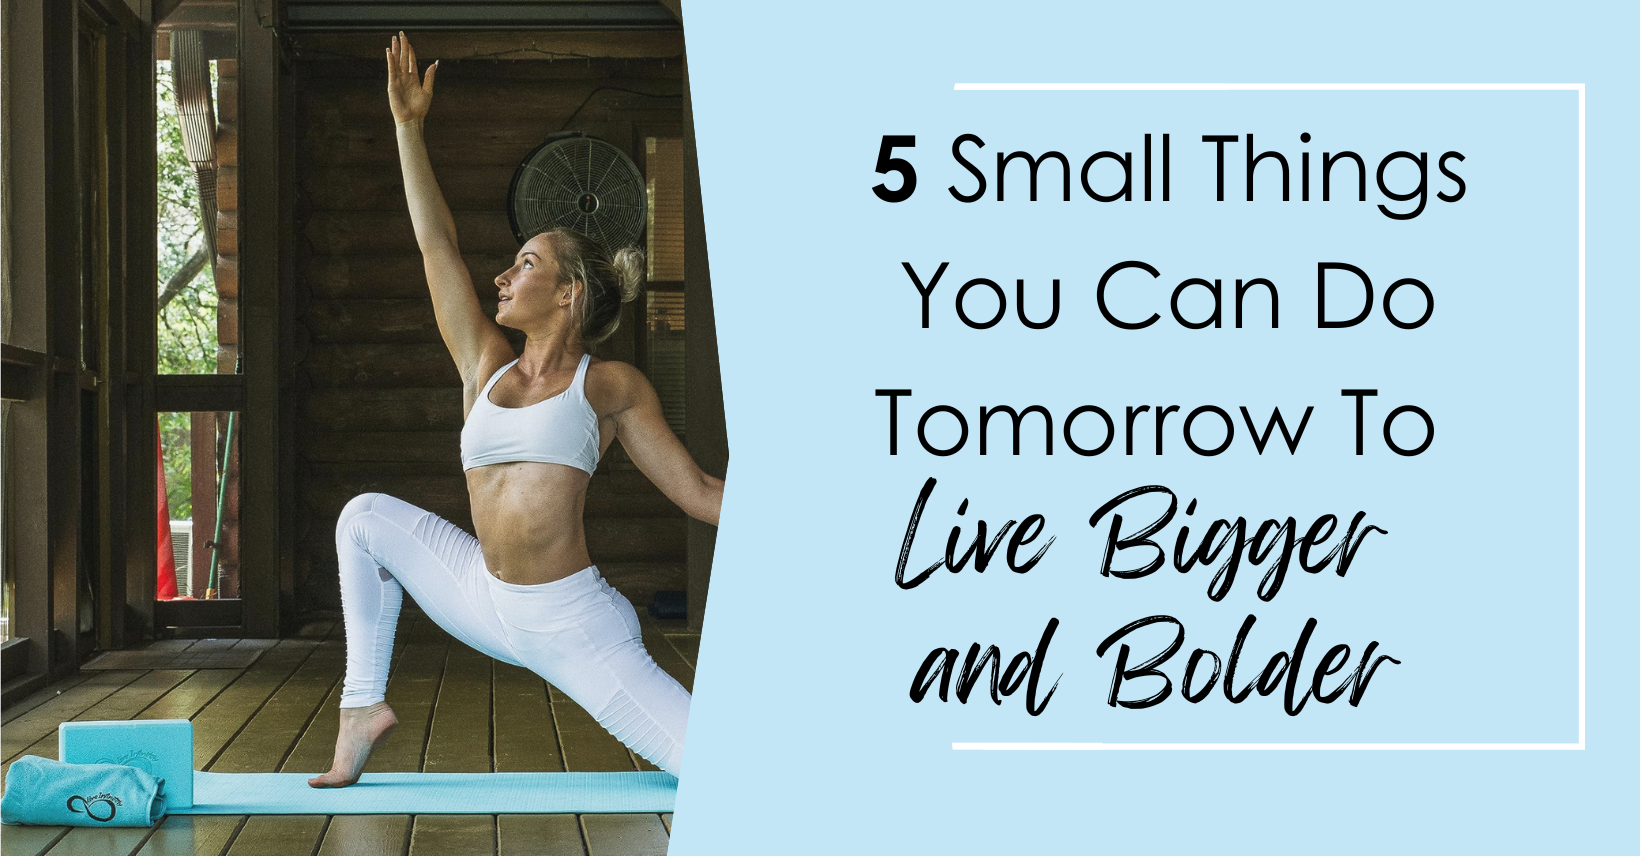 5 Small Things You Can Do Tomorrow to Live Bigger and Bolder